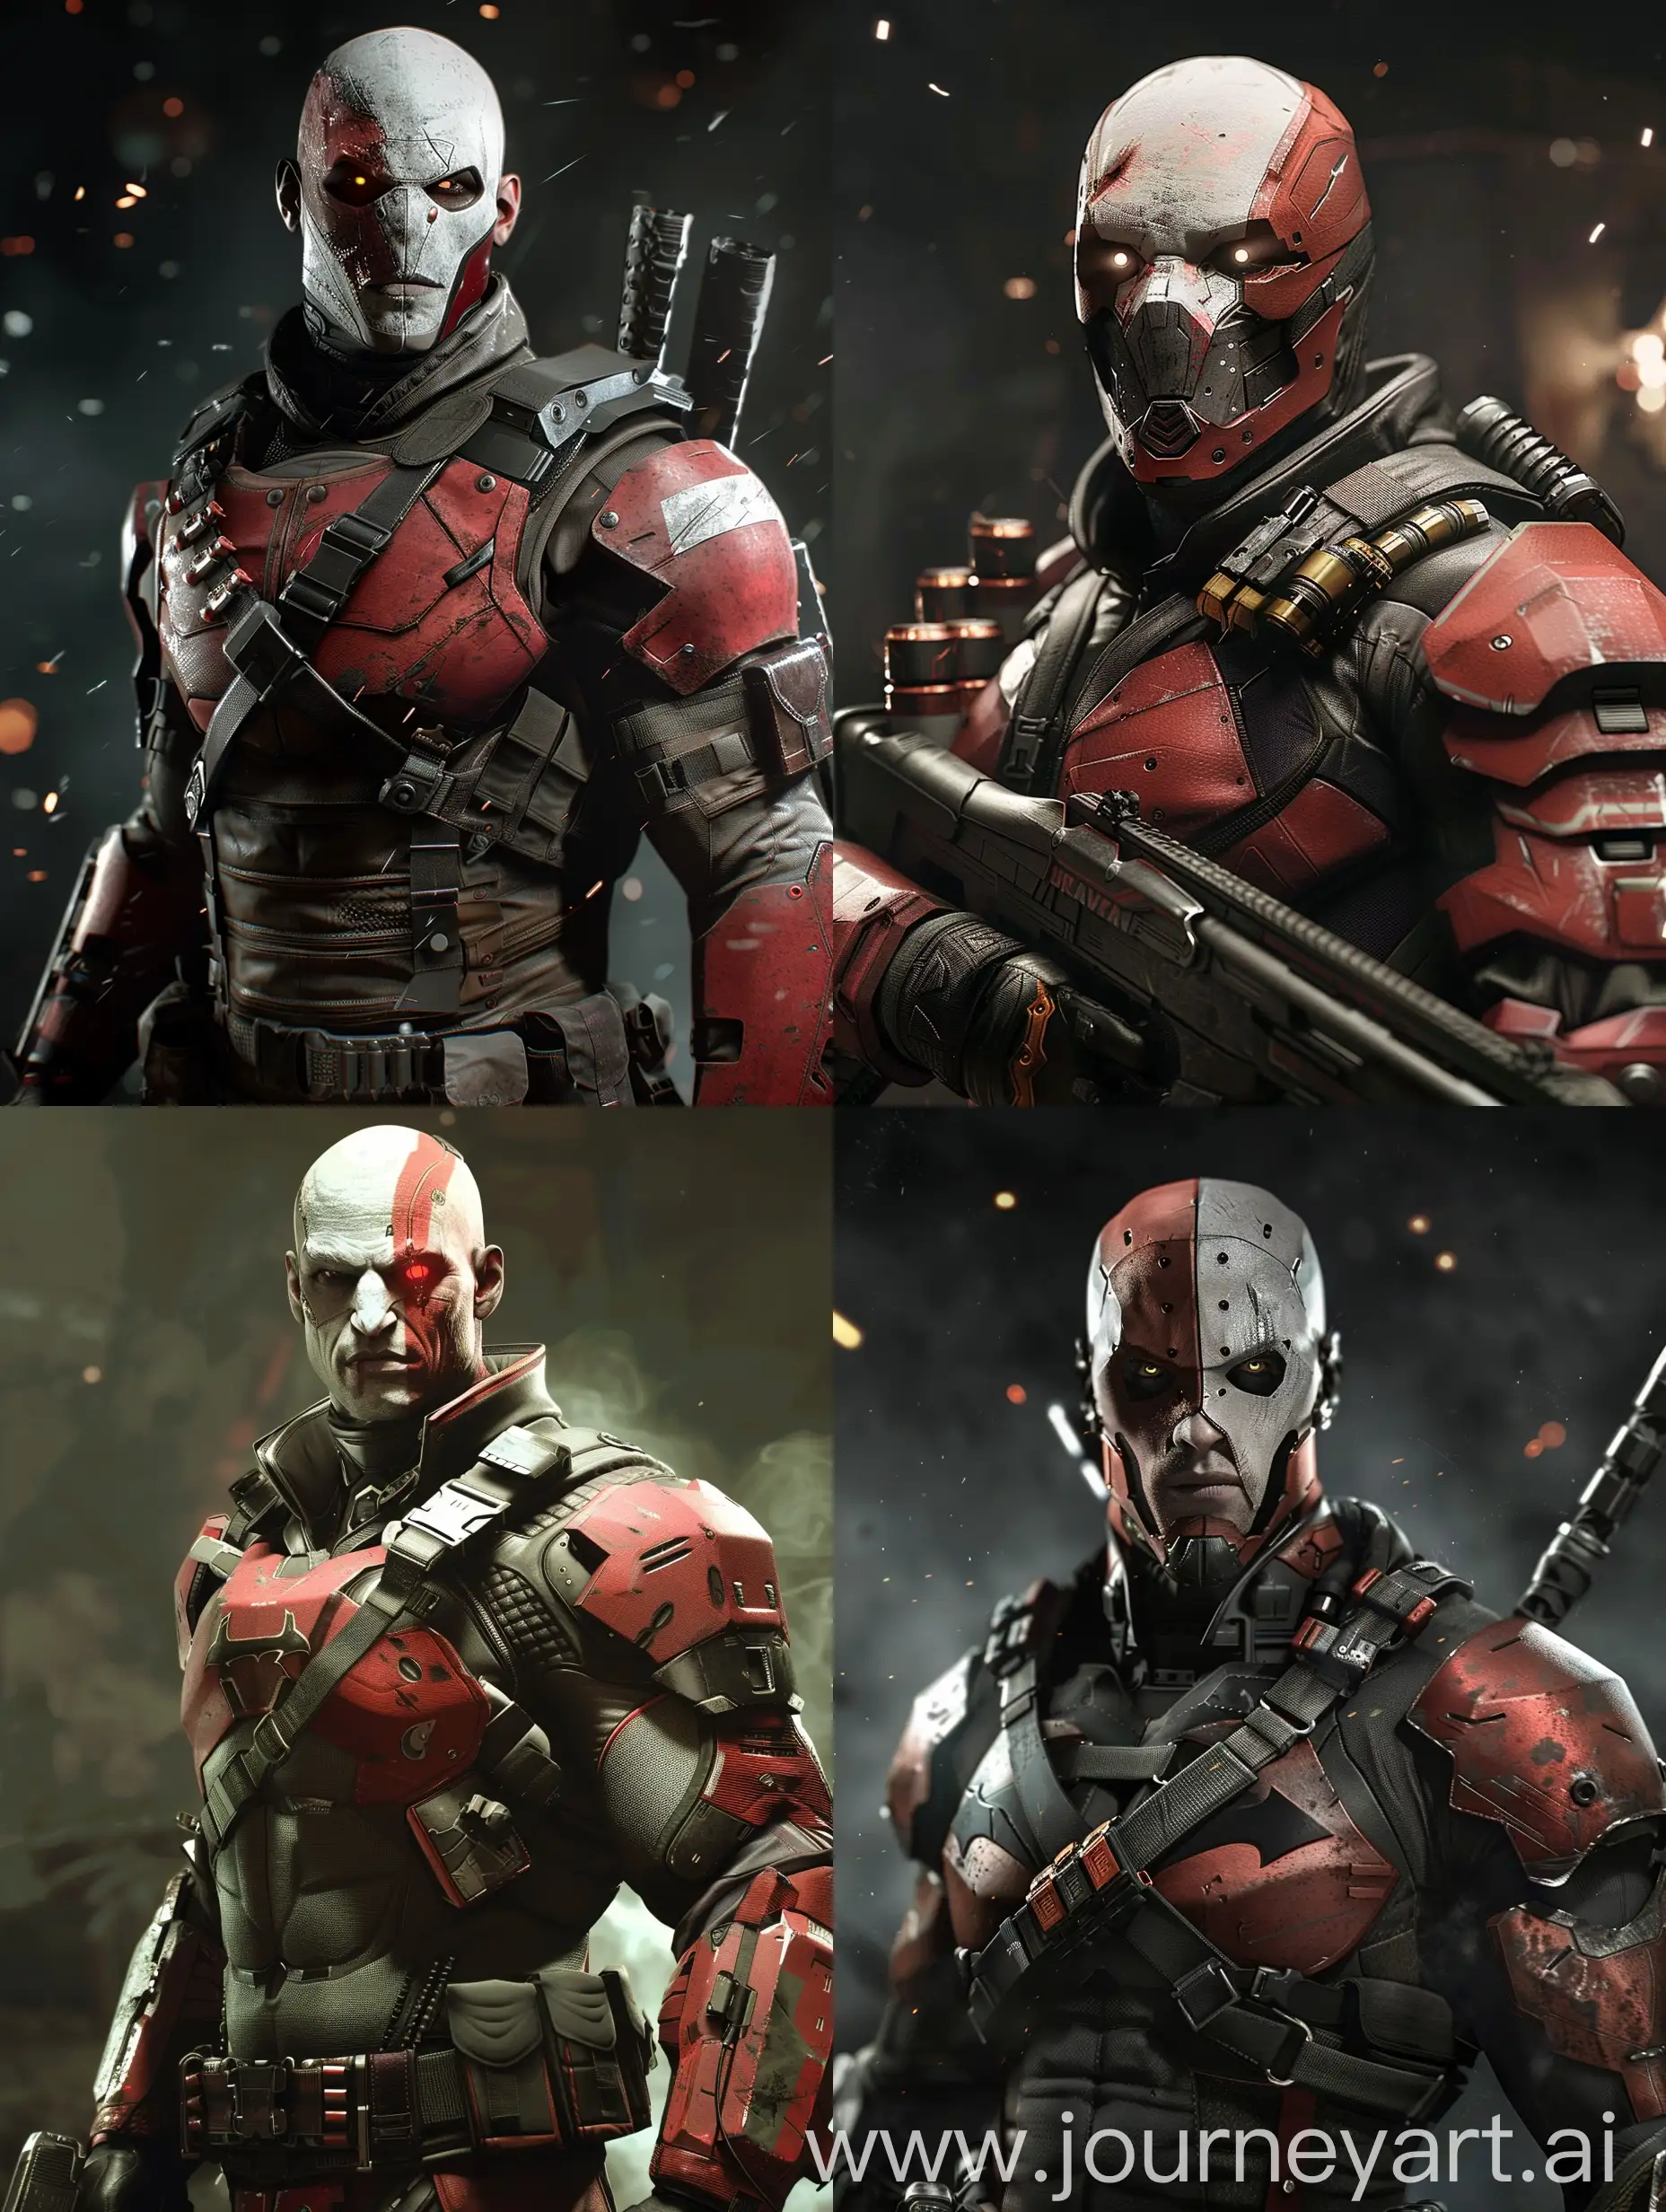 Deadshot-Character-in-Batman-Game-A-Deadly-Encounter-in-34-Aspect-Ratio